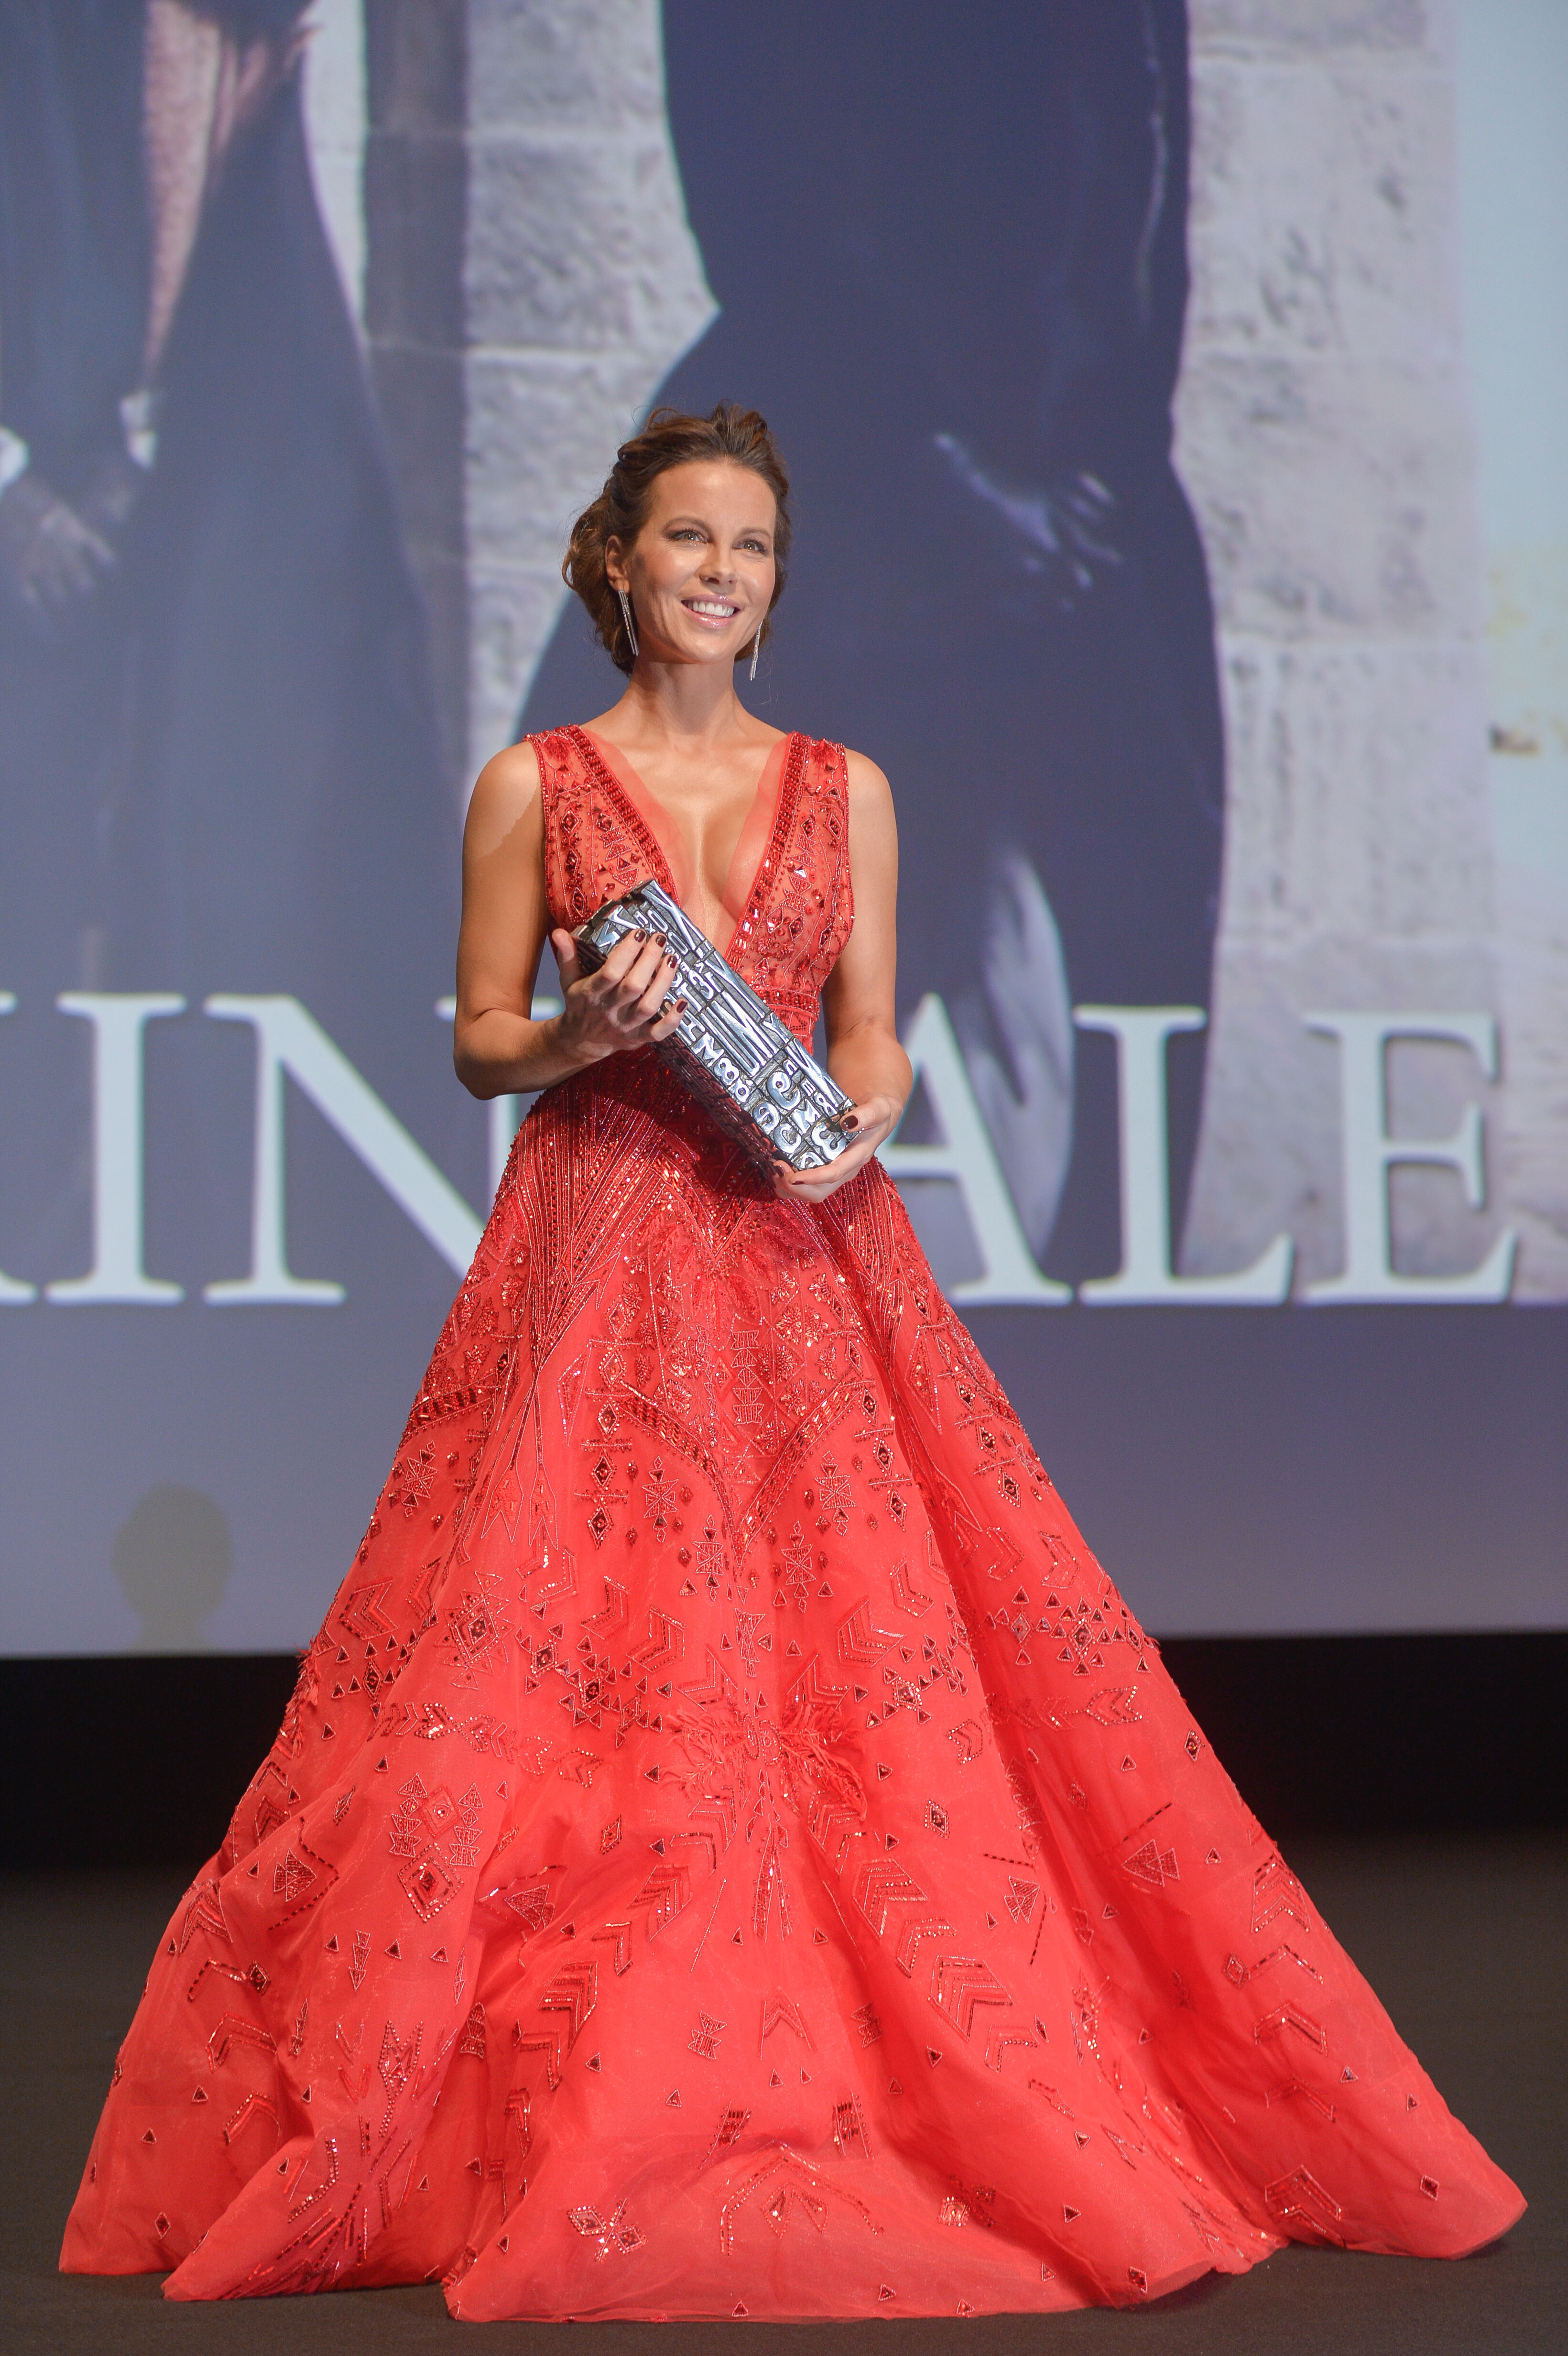 kate-beckinsale-44th-deauville-american-film-festival-in-deauville-france-9218-11